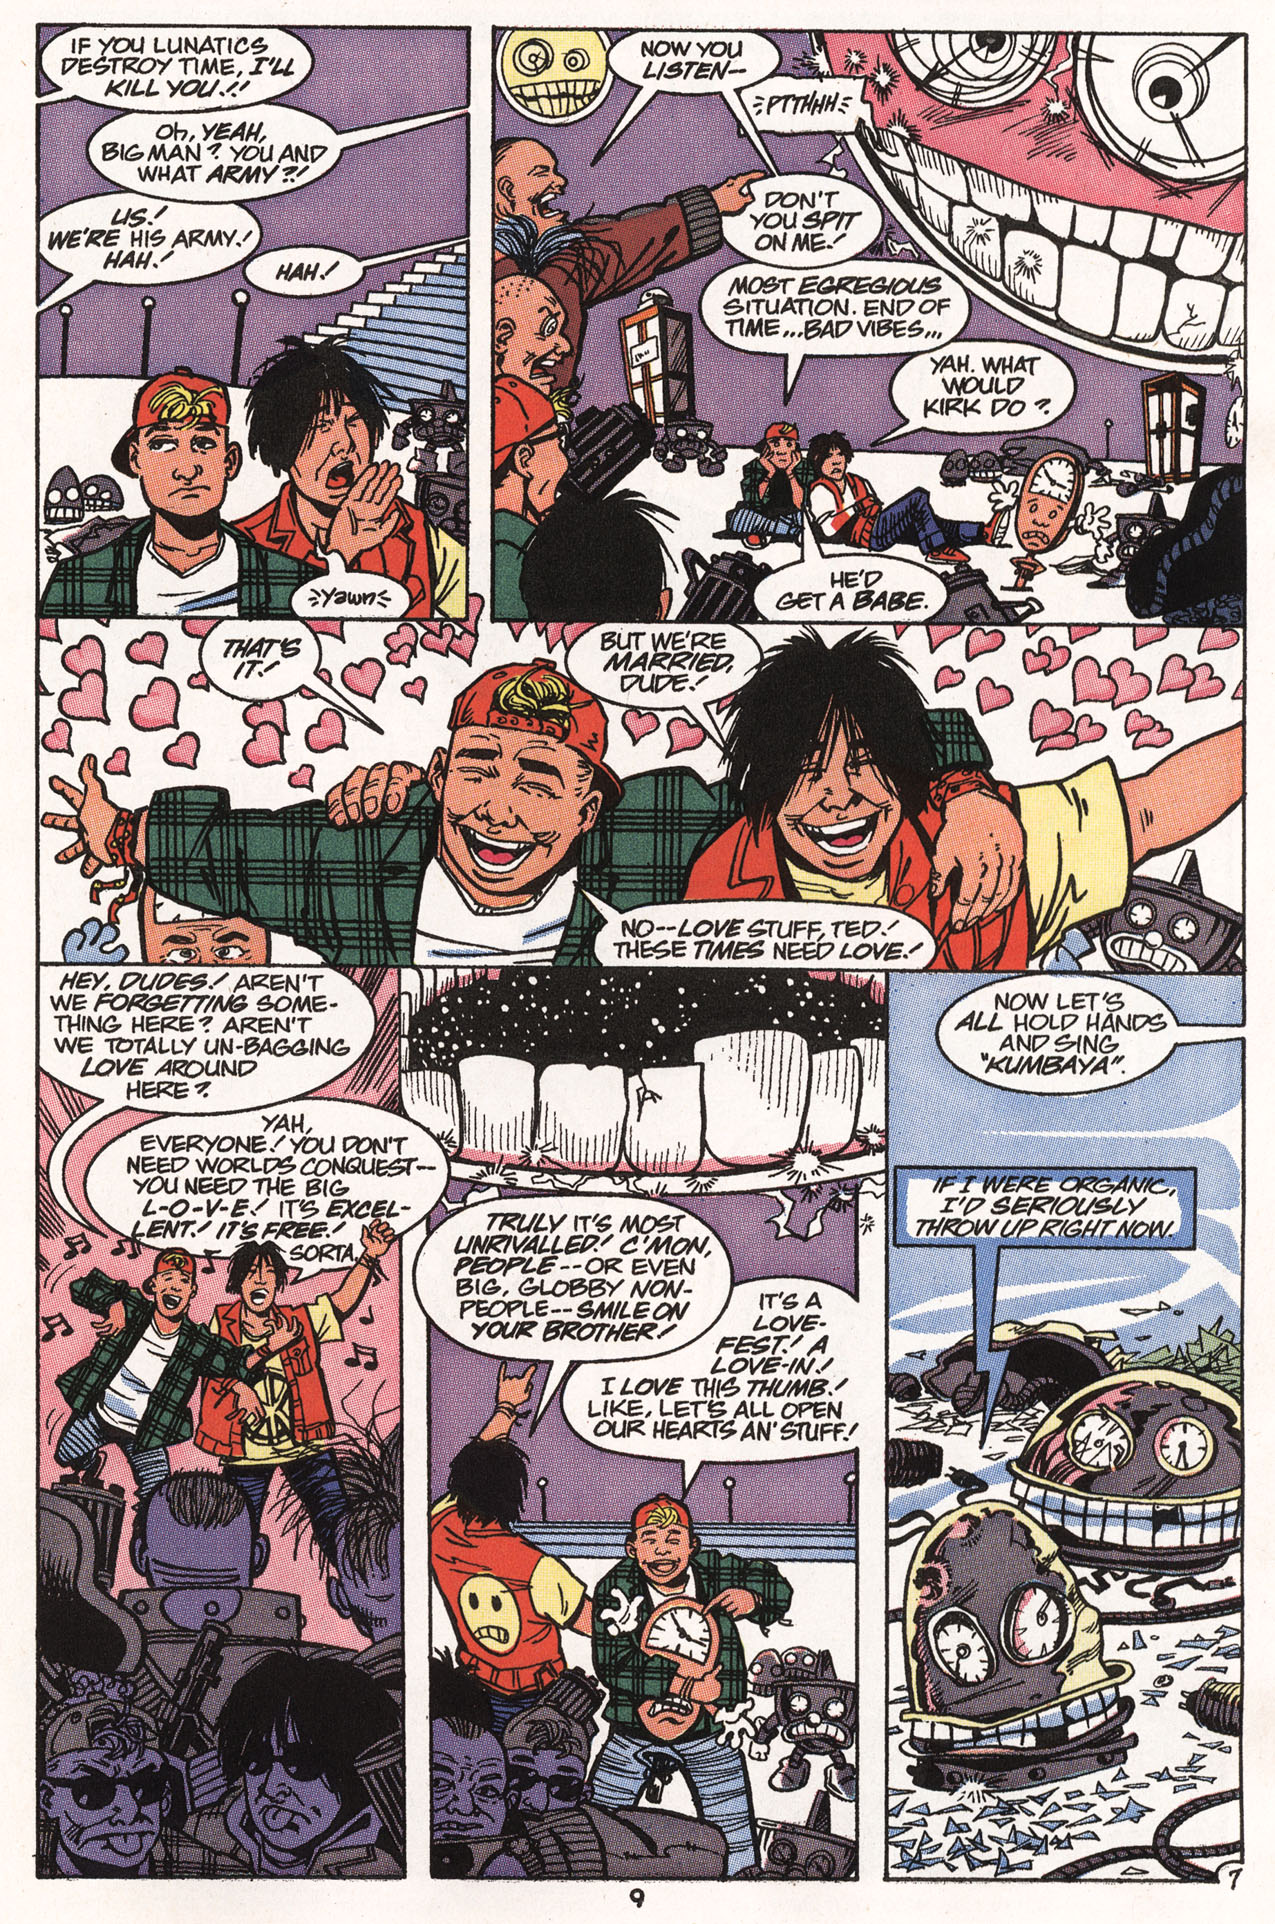 Read online Bill & Ted's Excellent Comic Book comic -  Issue #7 - 11